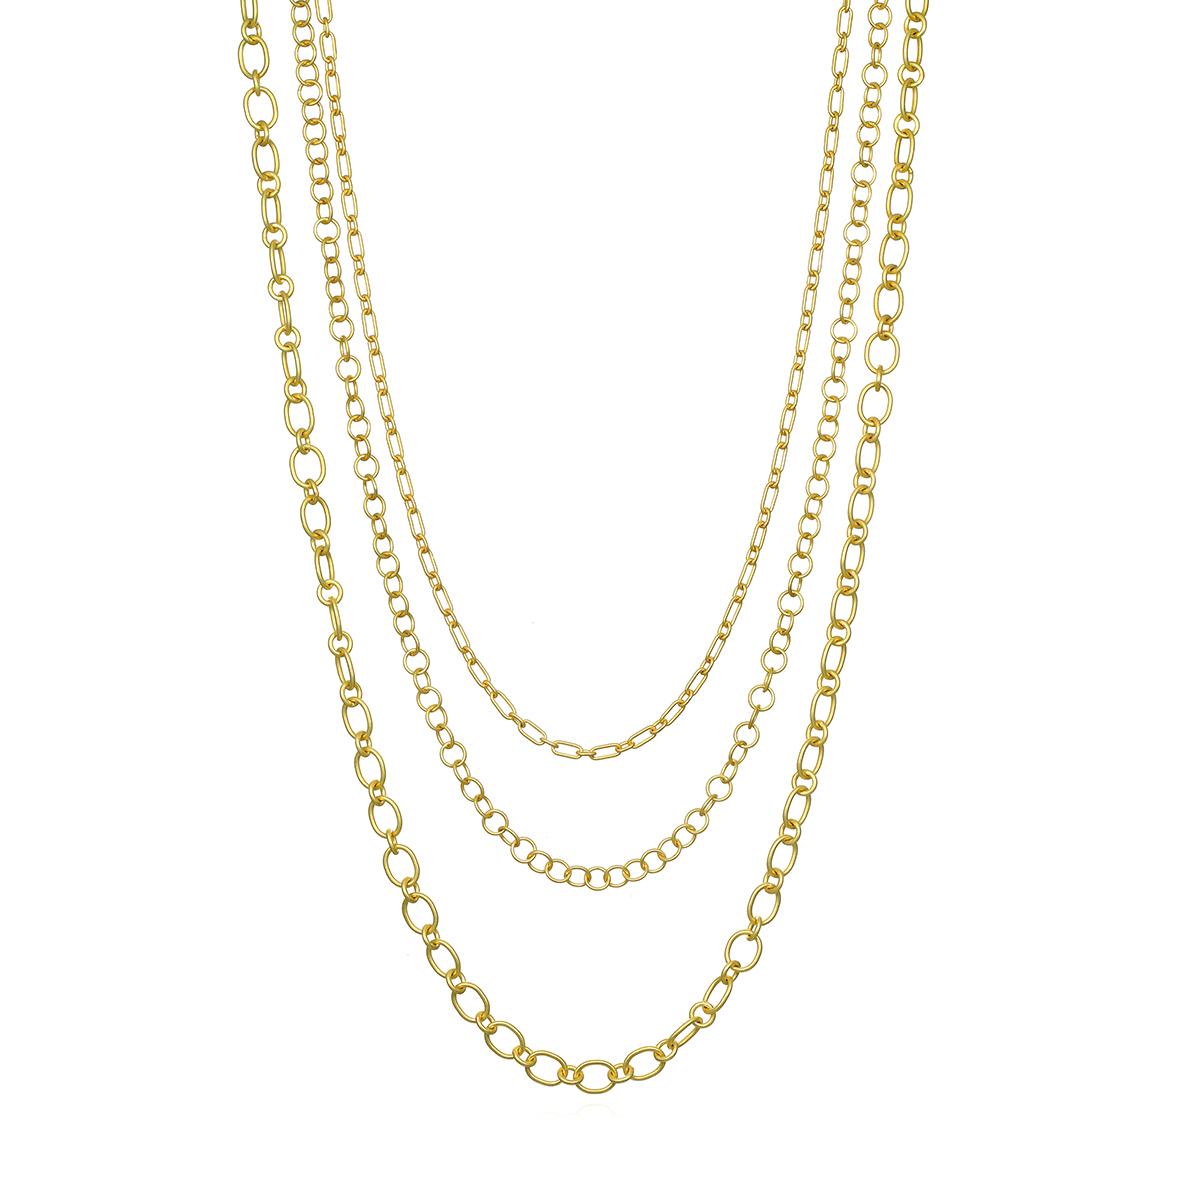 Experience everyday luxury in Faye Kim's 18 Karat Gold Mini Paperclip Vintage Link Chain. Completely versatile - the links allow for a variety of adjustable lengths and styles.  Wear it long, short, doubled and layered, with or without a